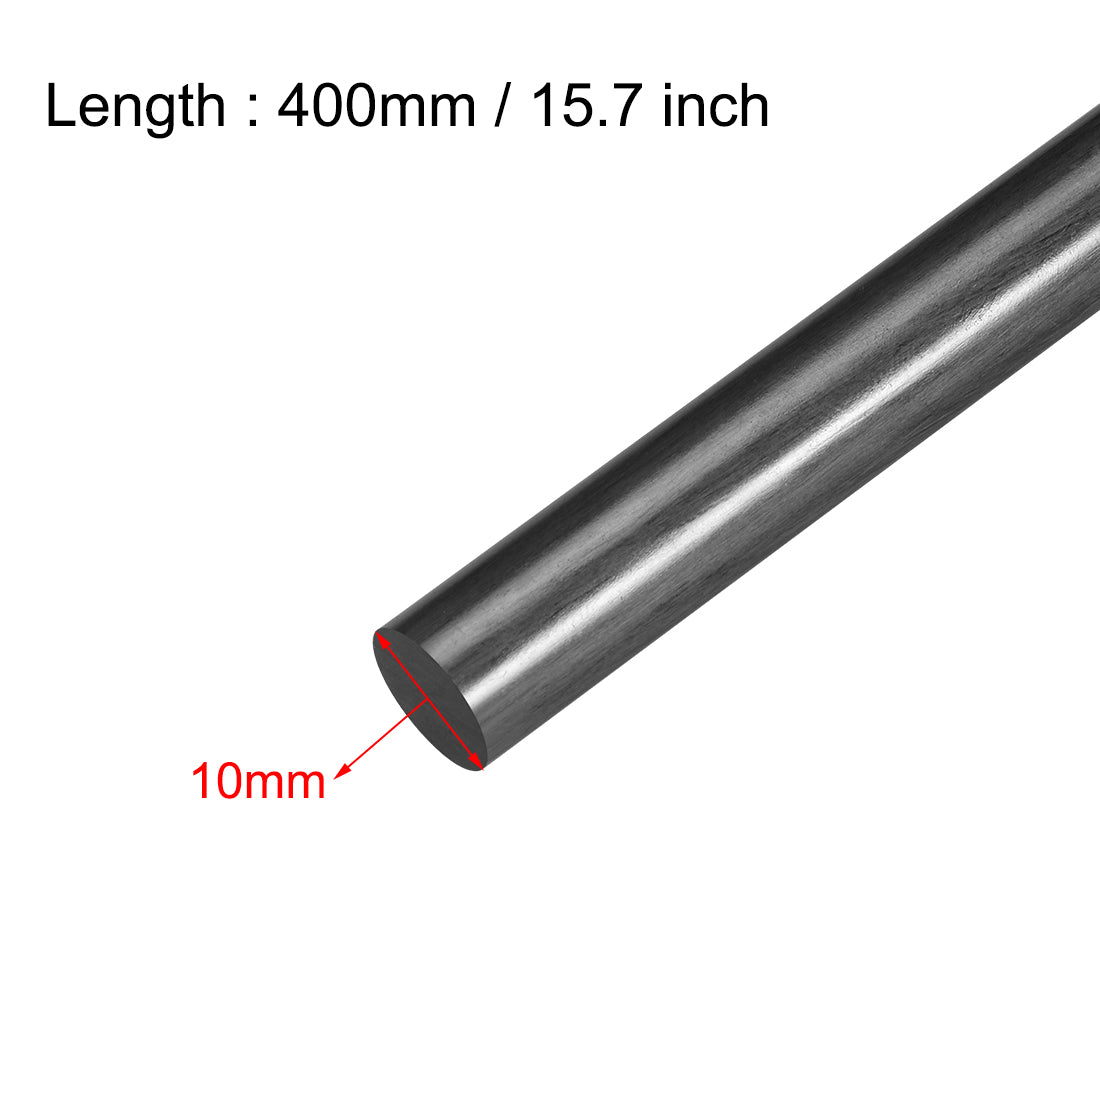 Uxcell Uxcell 2pcs 8mm Carbon Fiber Rod For RC Airplane Matte Pole US, 400mm 15.7 inch